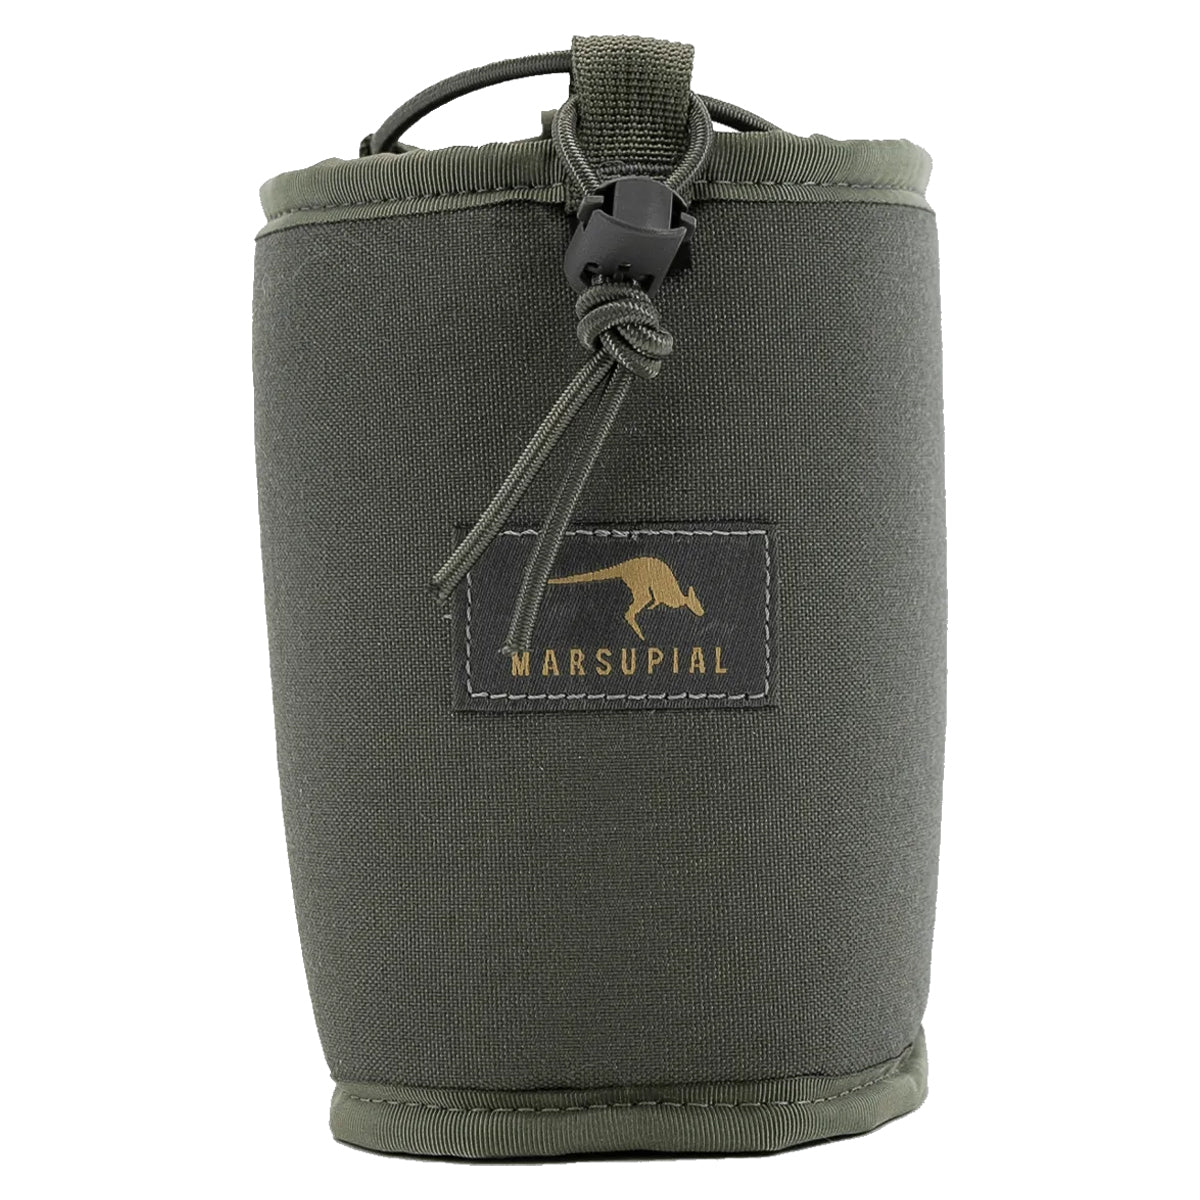 Marsupial Gear Water Bottle Pouch in Foliage by GOHUNT | Marsupial Gear - GOHUNT Shop